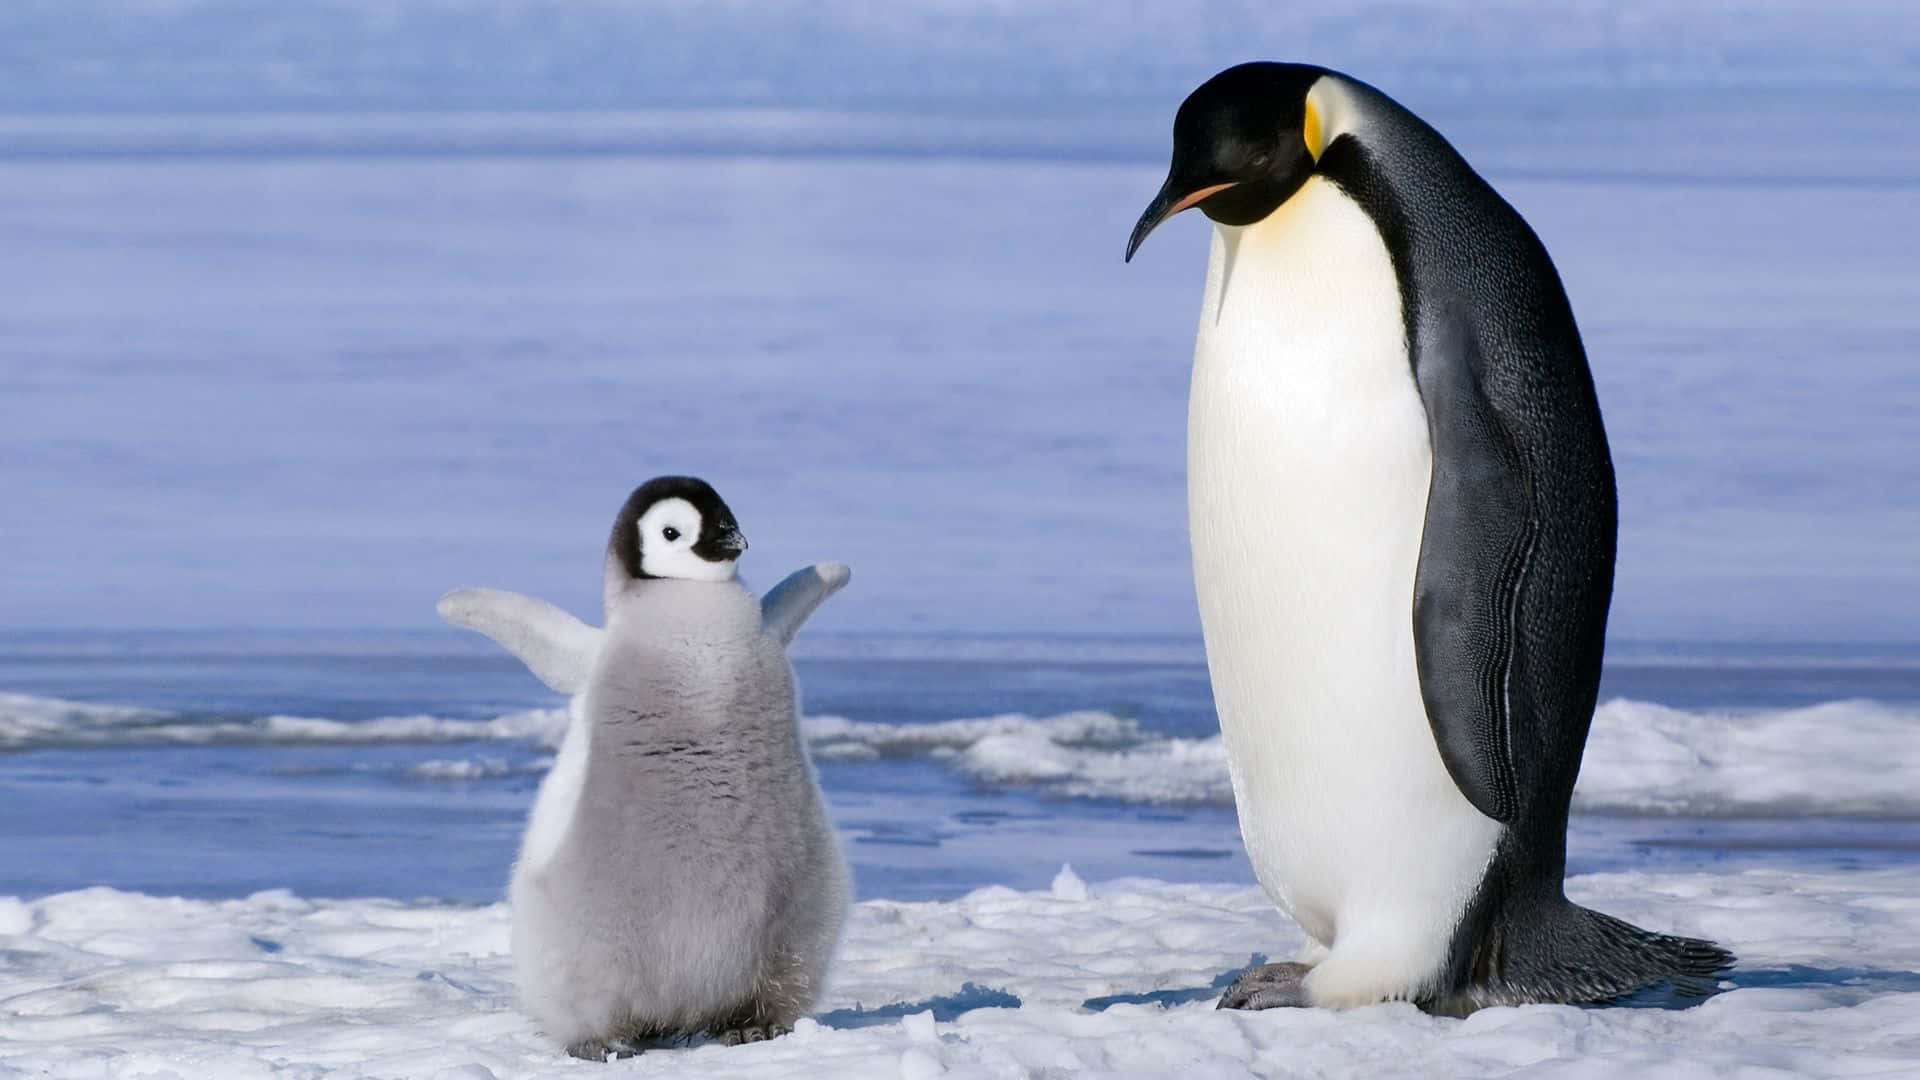 A baby penguin nestles among the snow, braving the chilly winter.